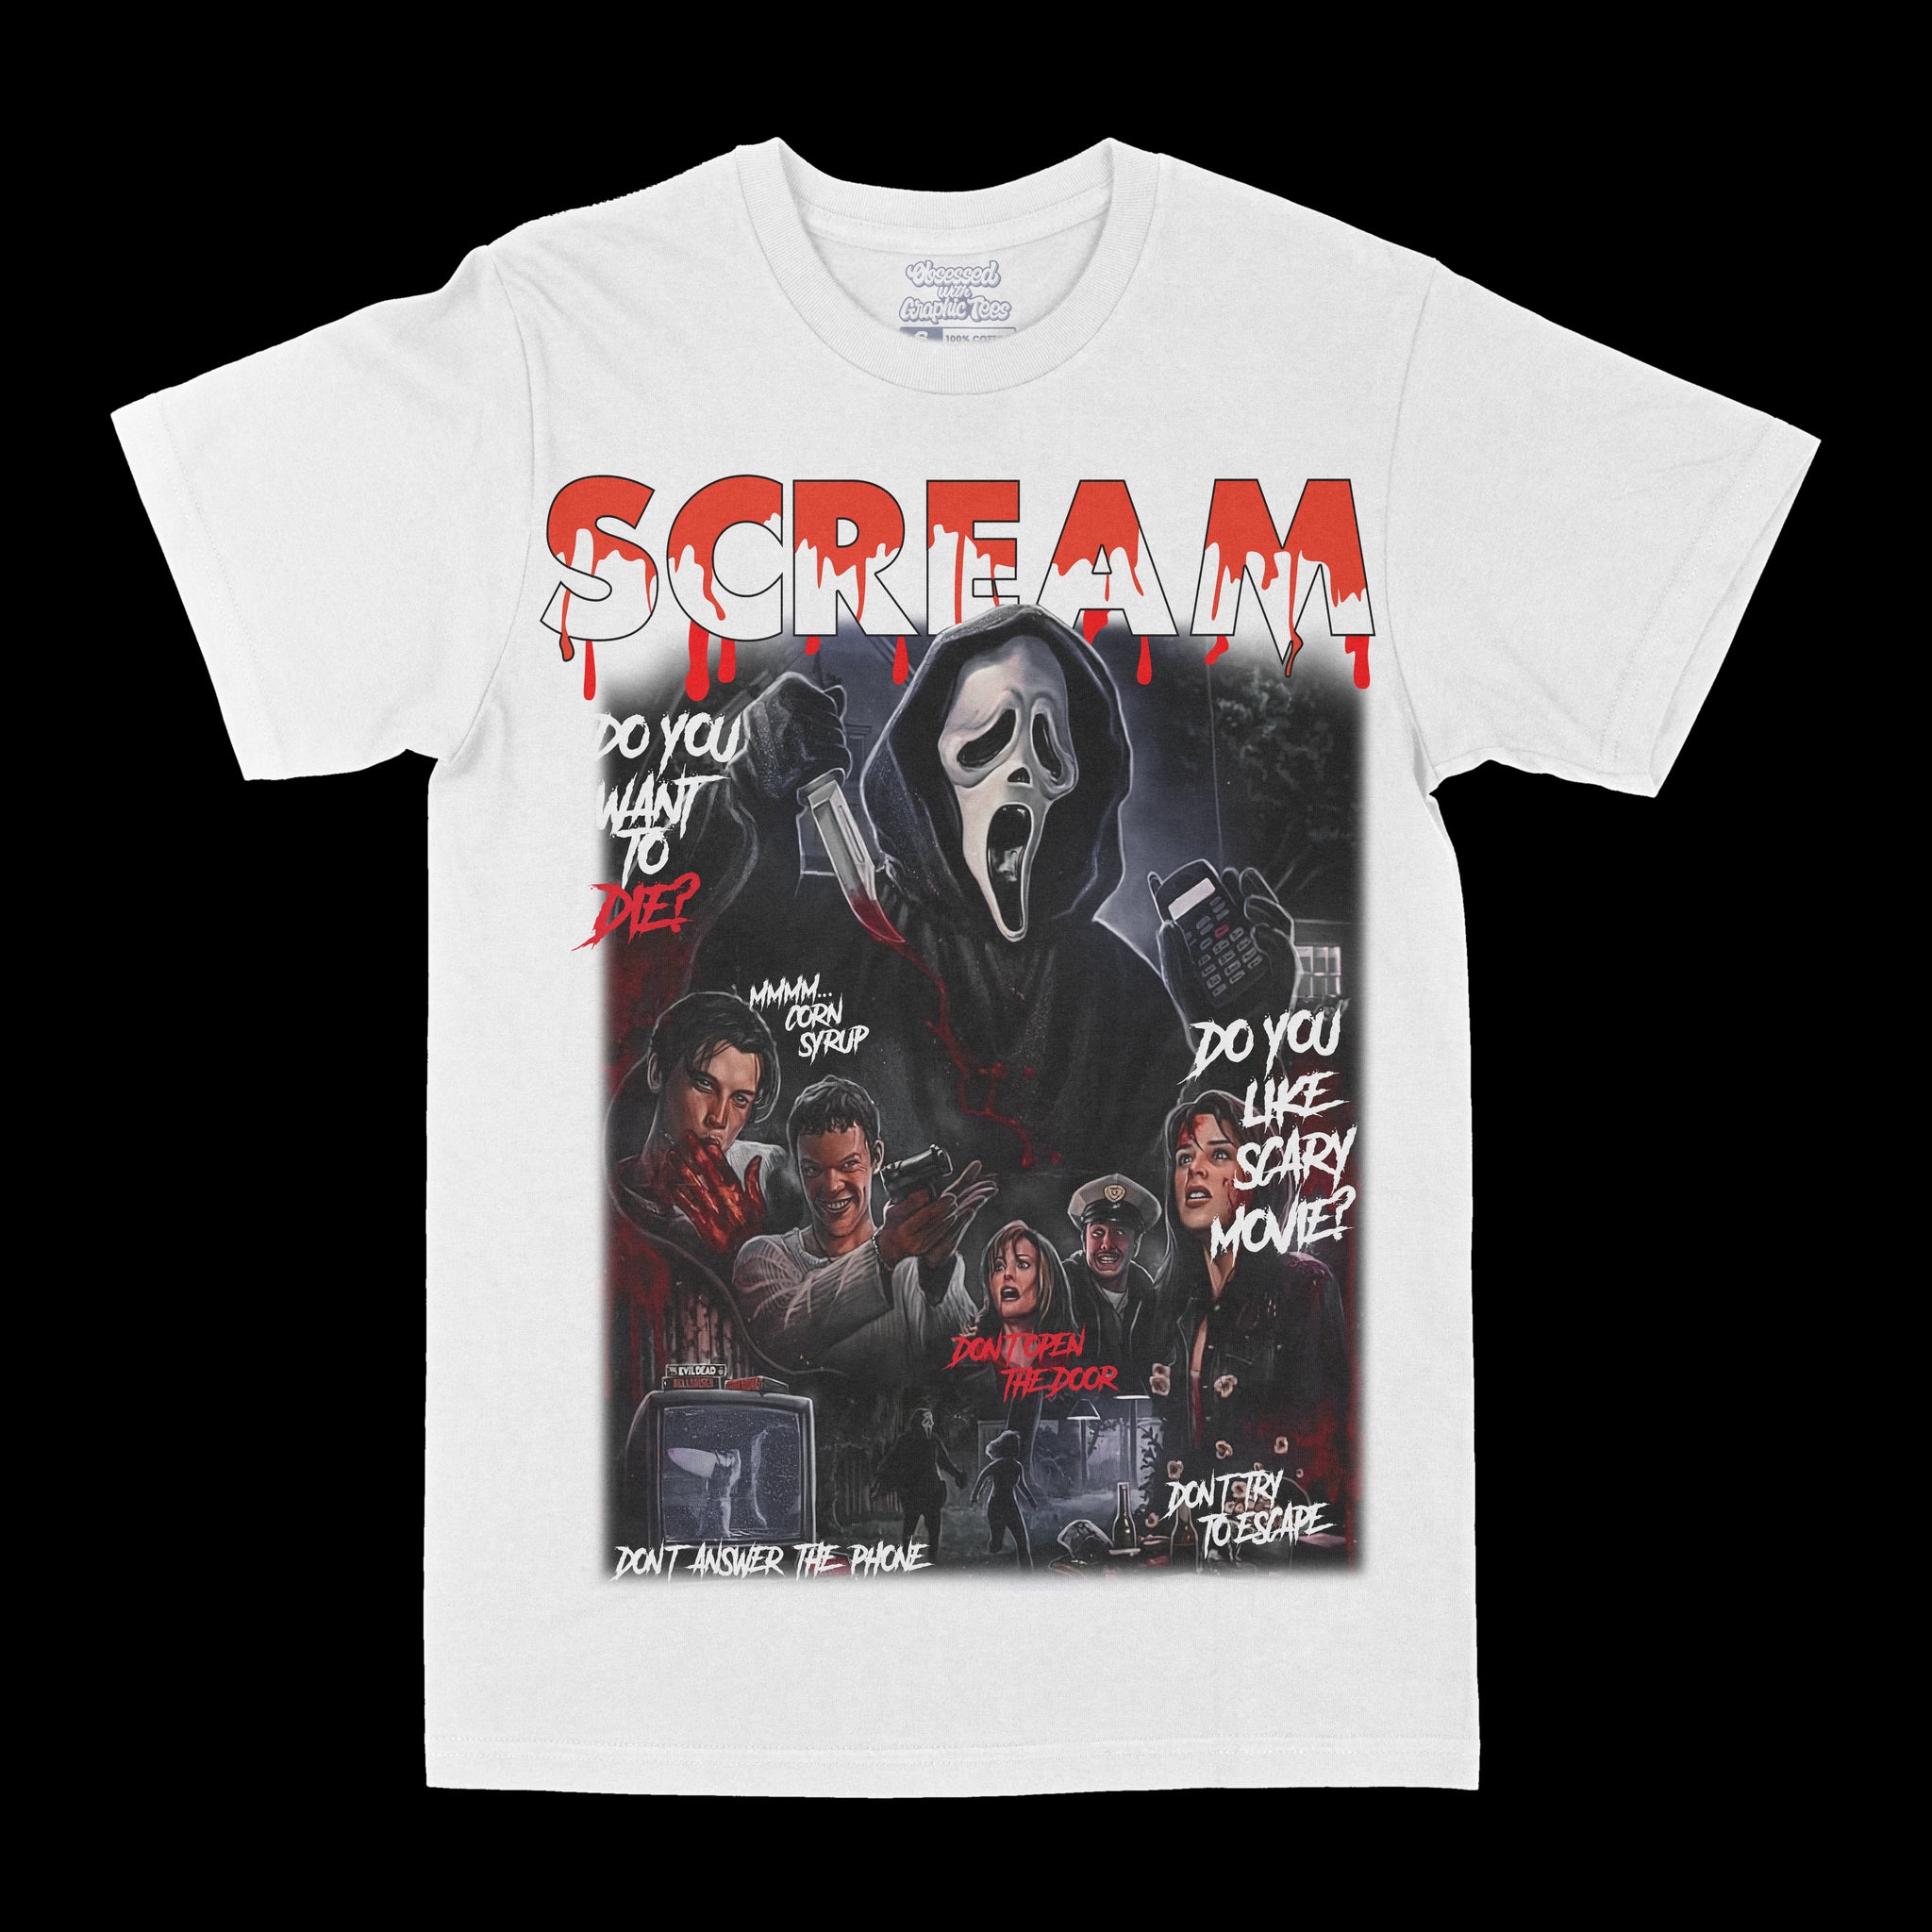 Scream "Don't Answer The Phone" Graphic Tee